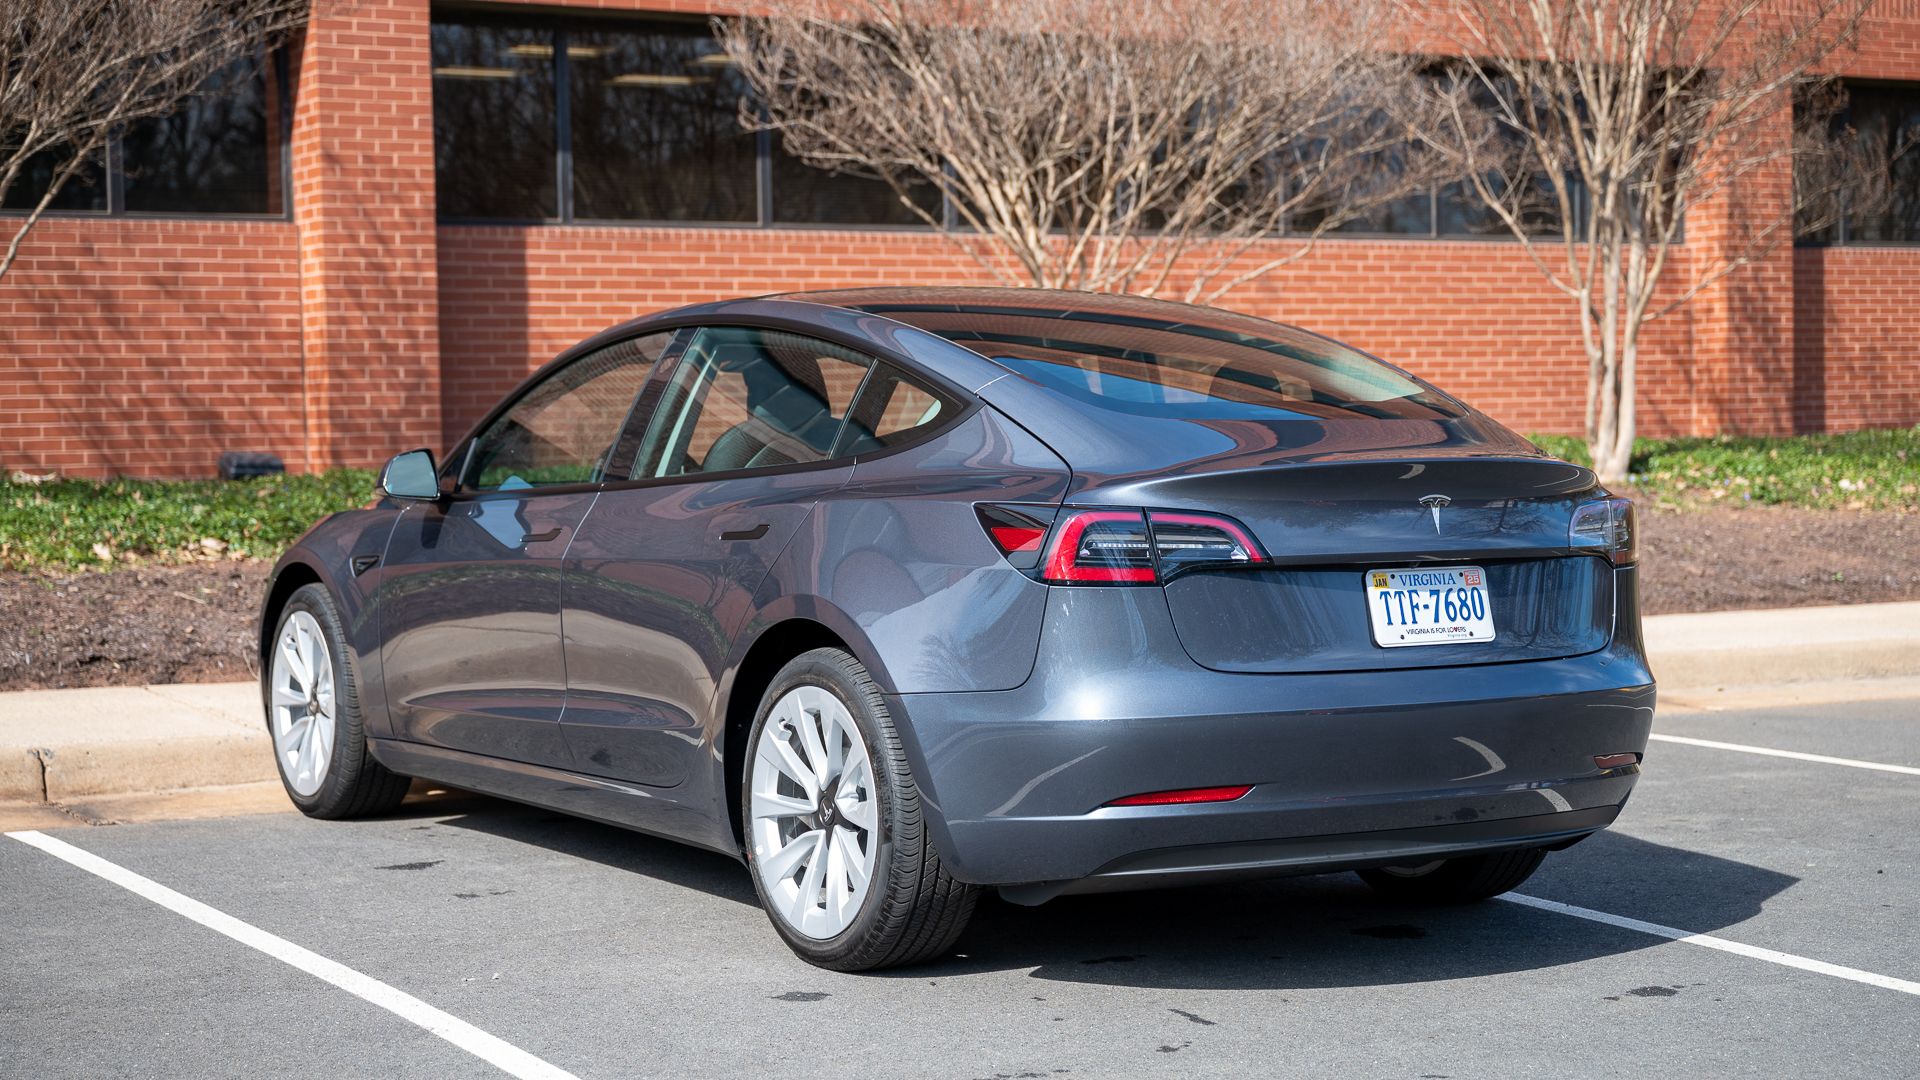 Rear and side profile of the Tesla Model 3.